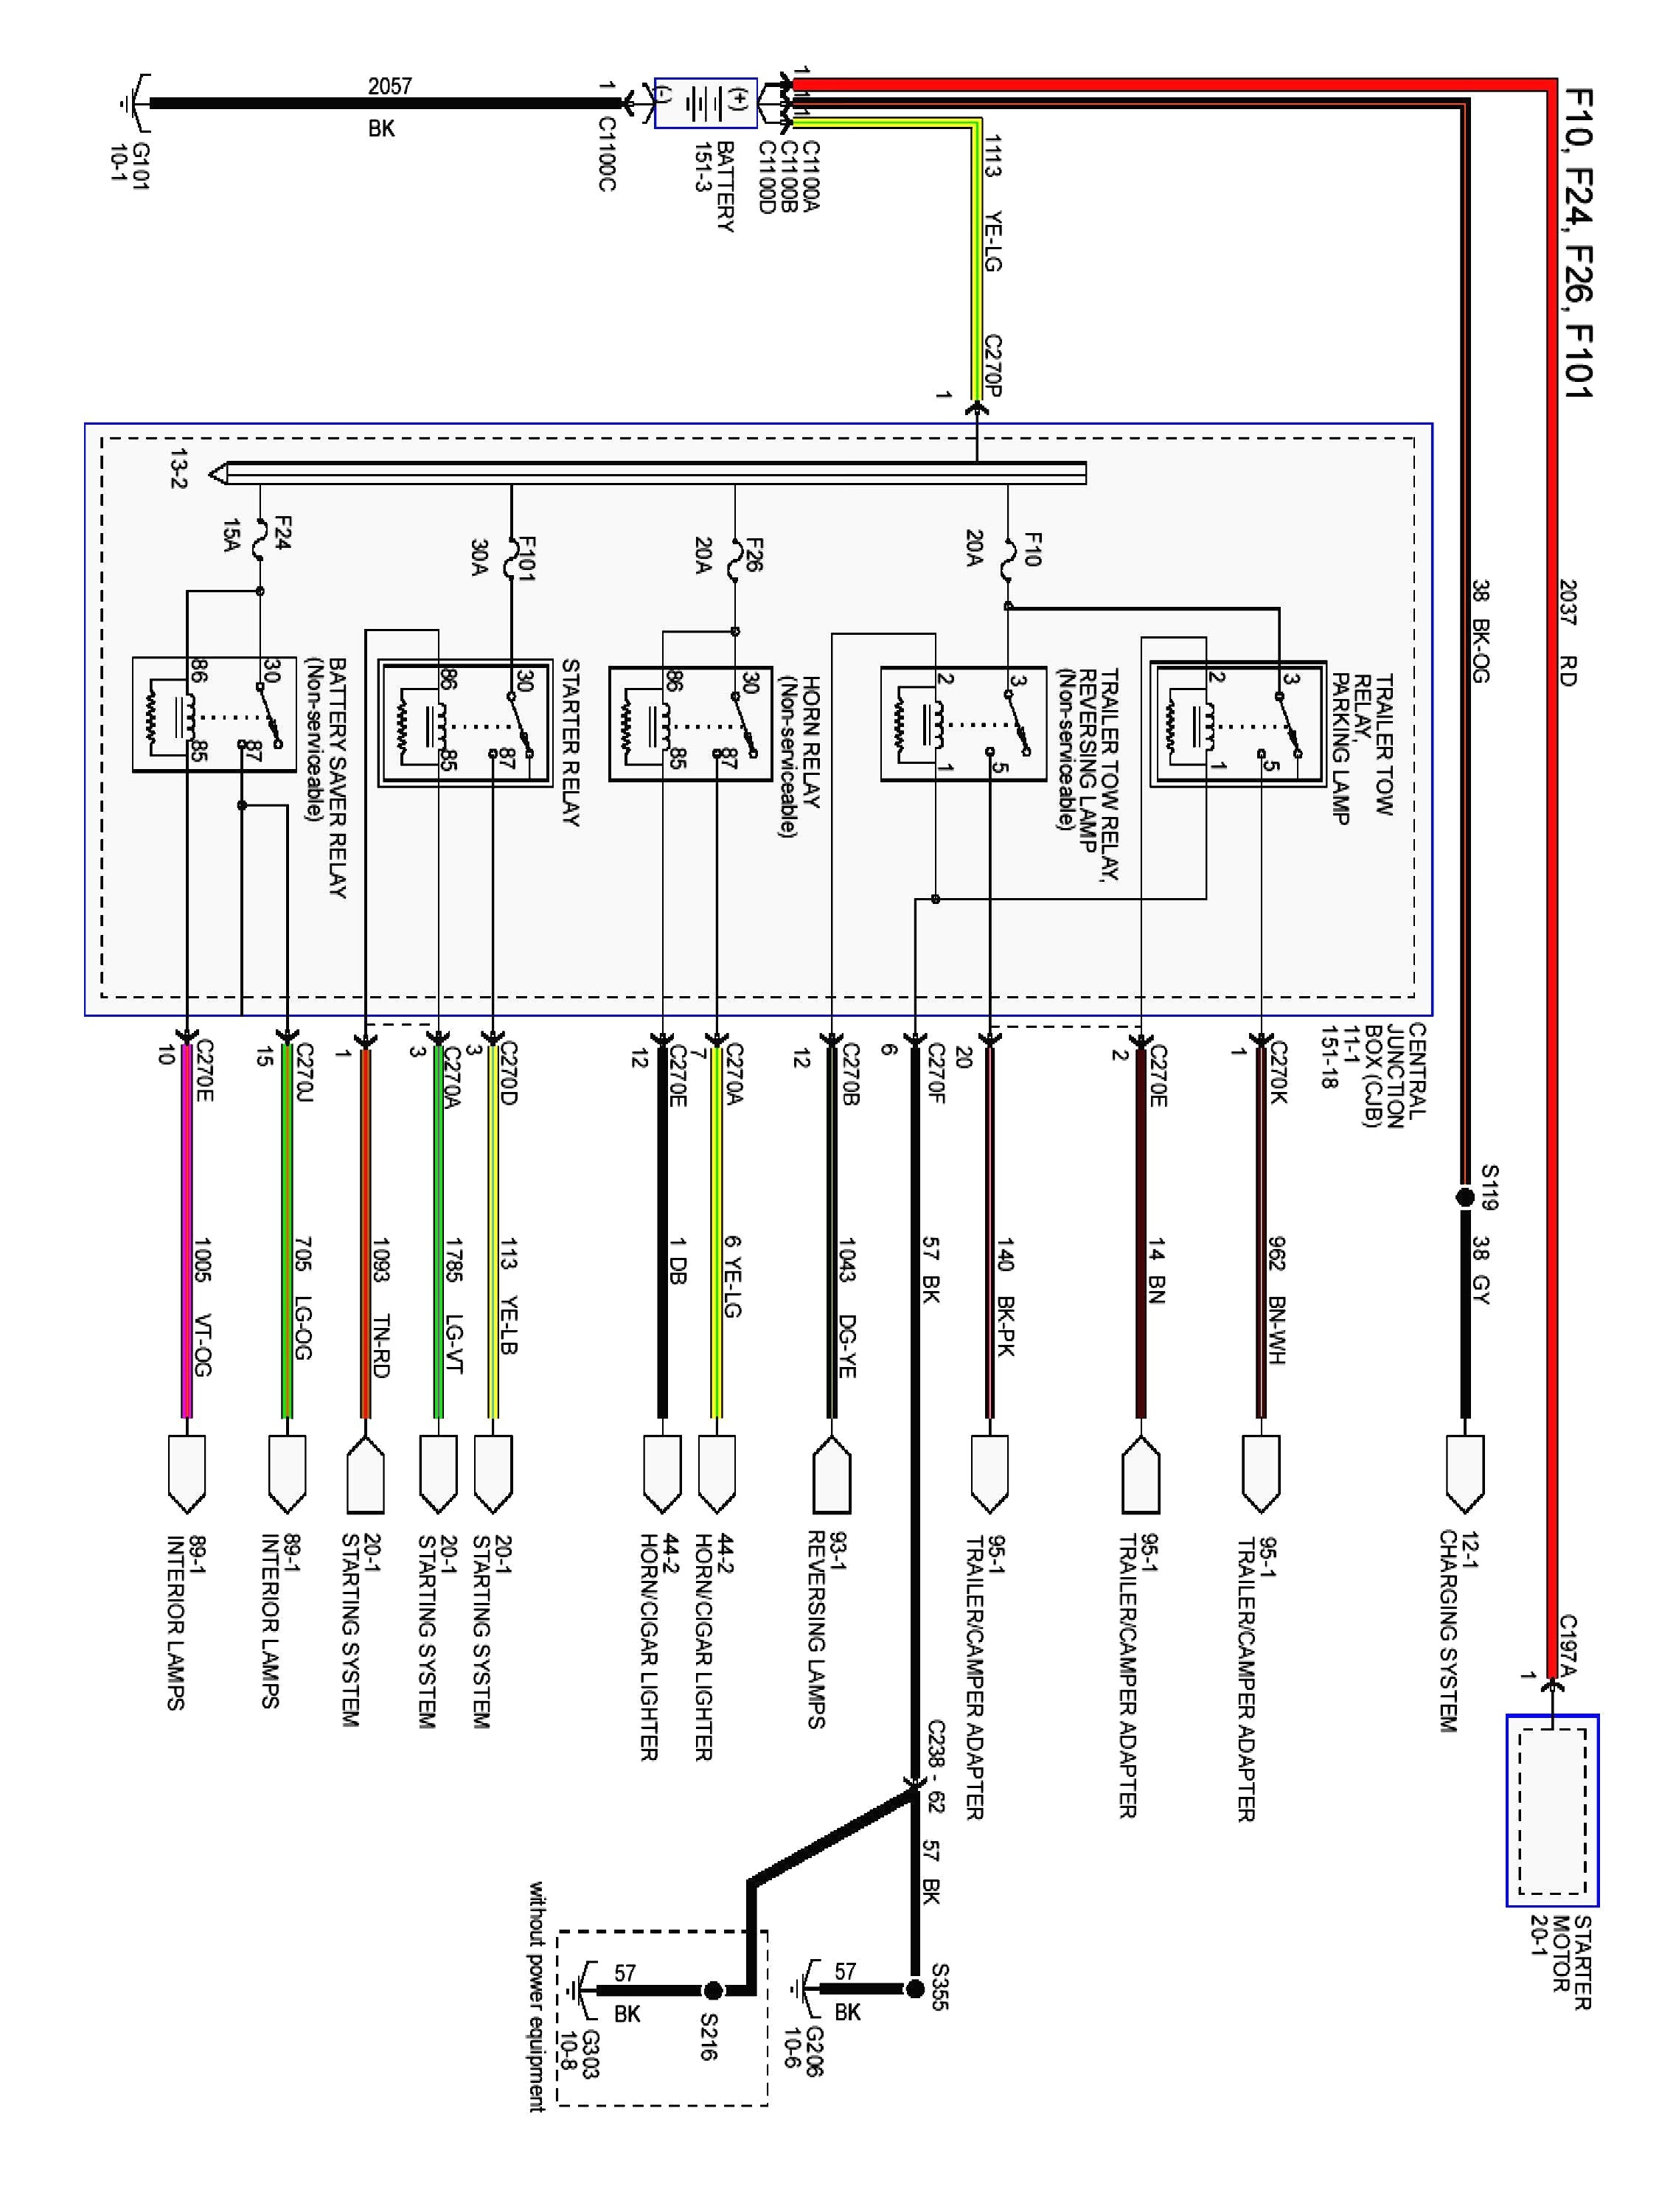 2010 Ford F150 Trailer Wiring Harness Diagram from detoxicrecenze.com